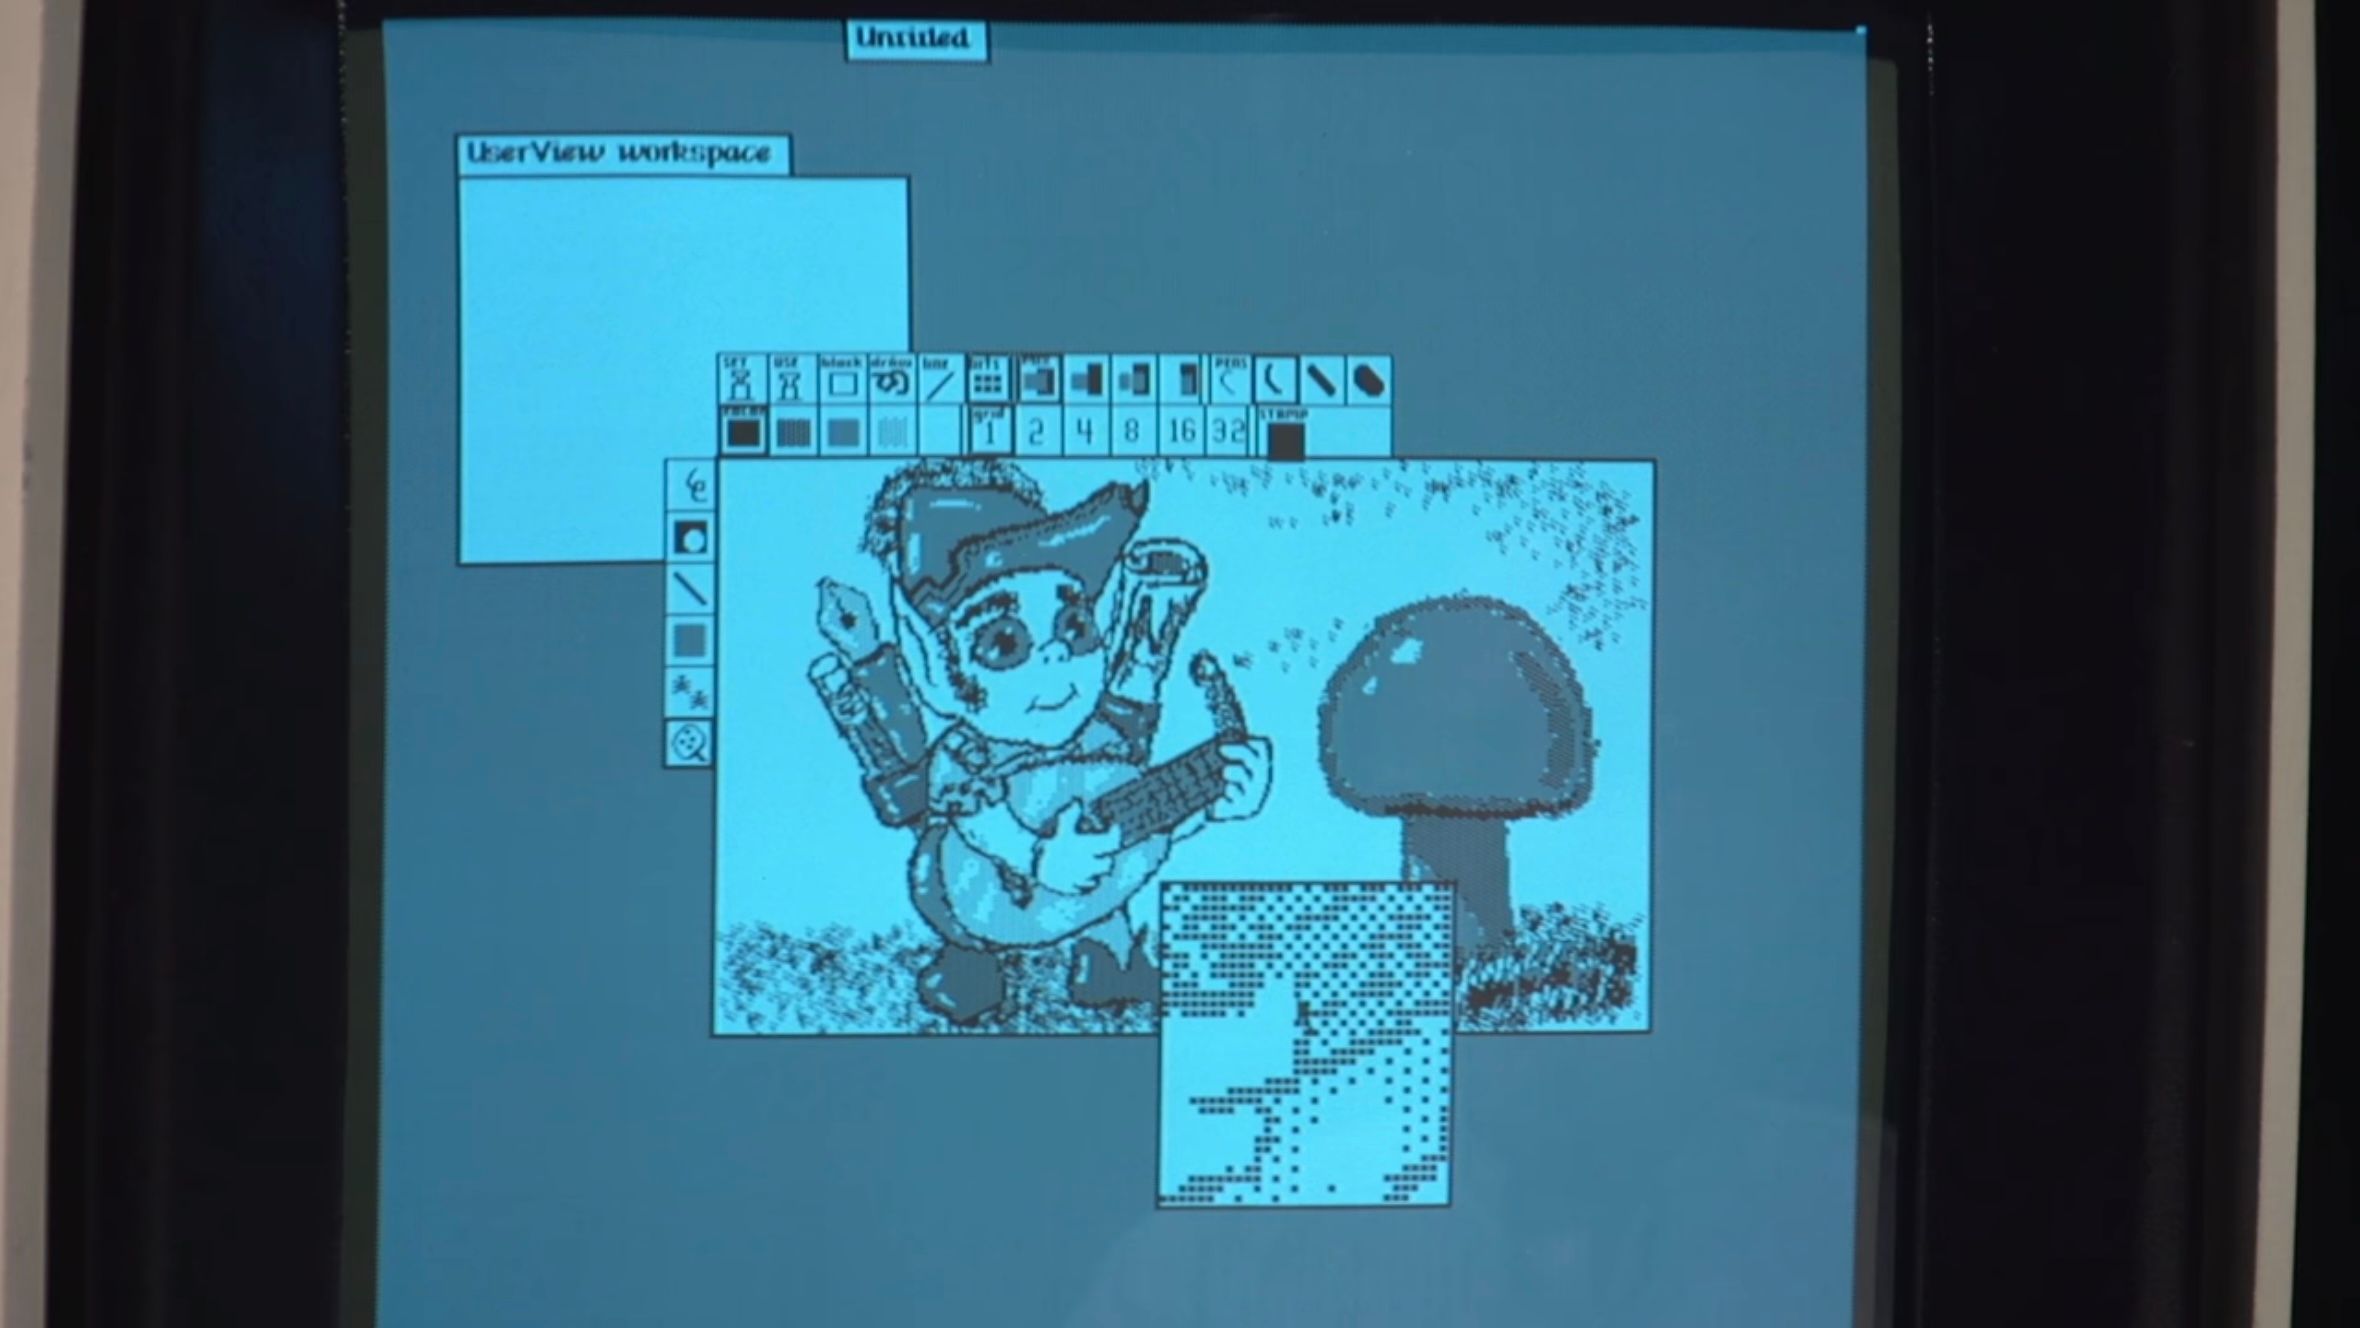 An early example of a “paint” program running on Smalltalk. Credit: Computer History Museum